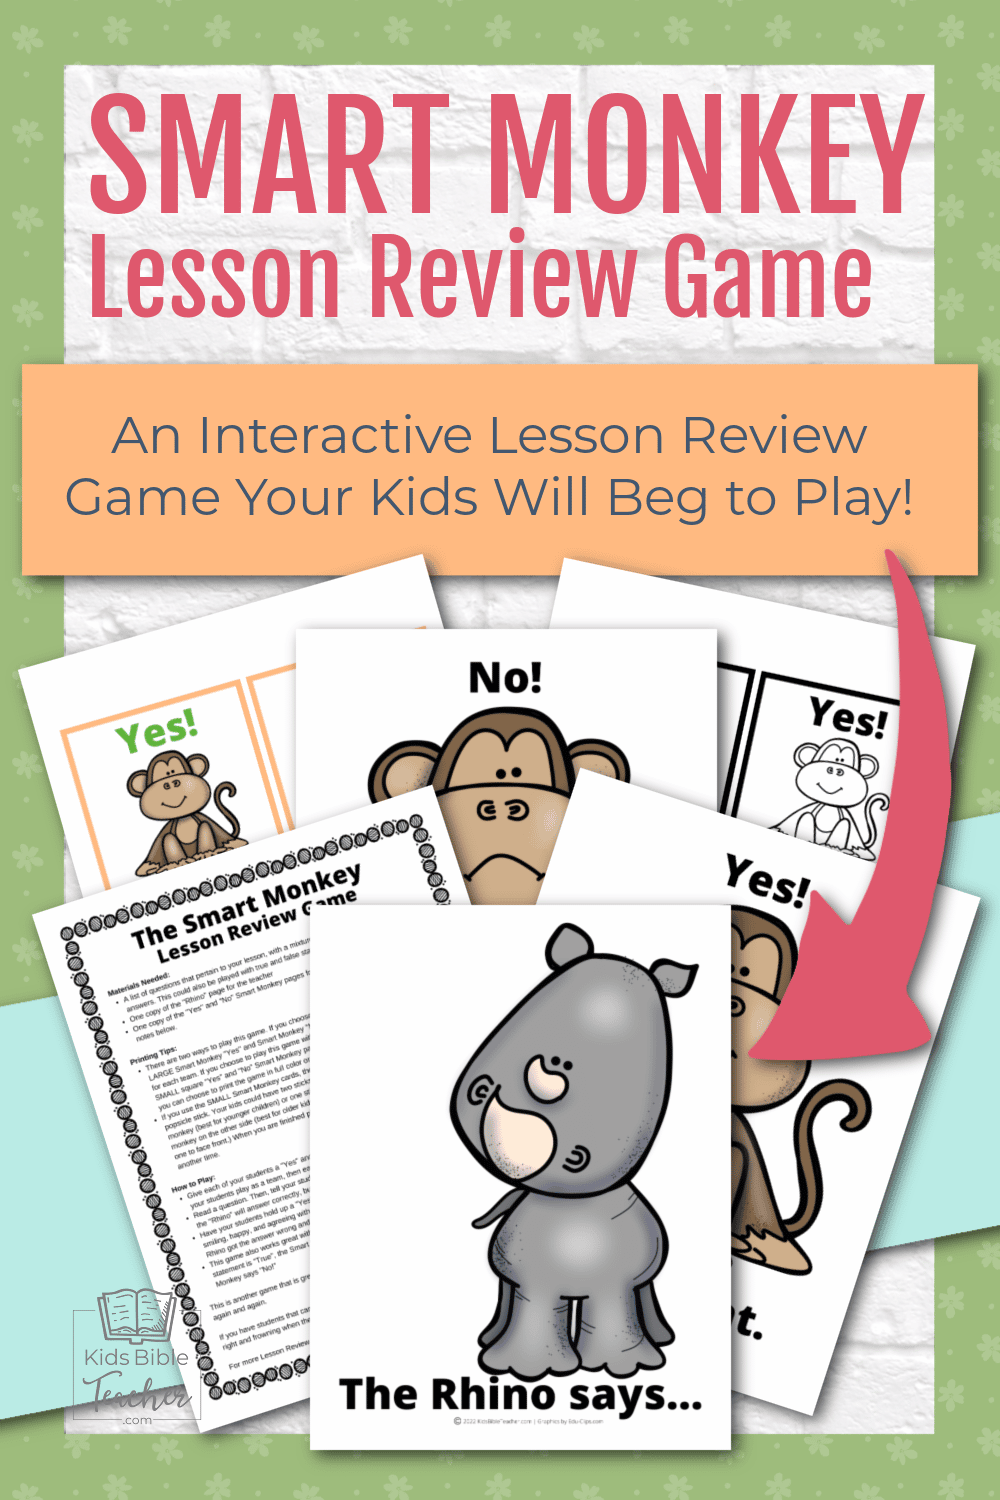 Do you need a game for studying any lesson? Try this Smart Monkey Lesson Review Game - perfect for ANY content that your kids are studying!